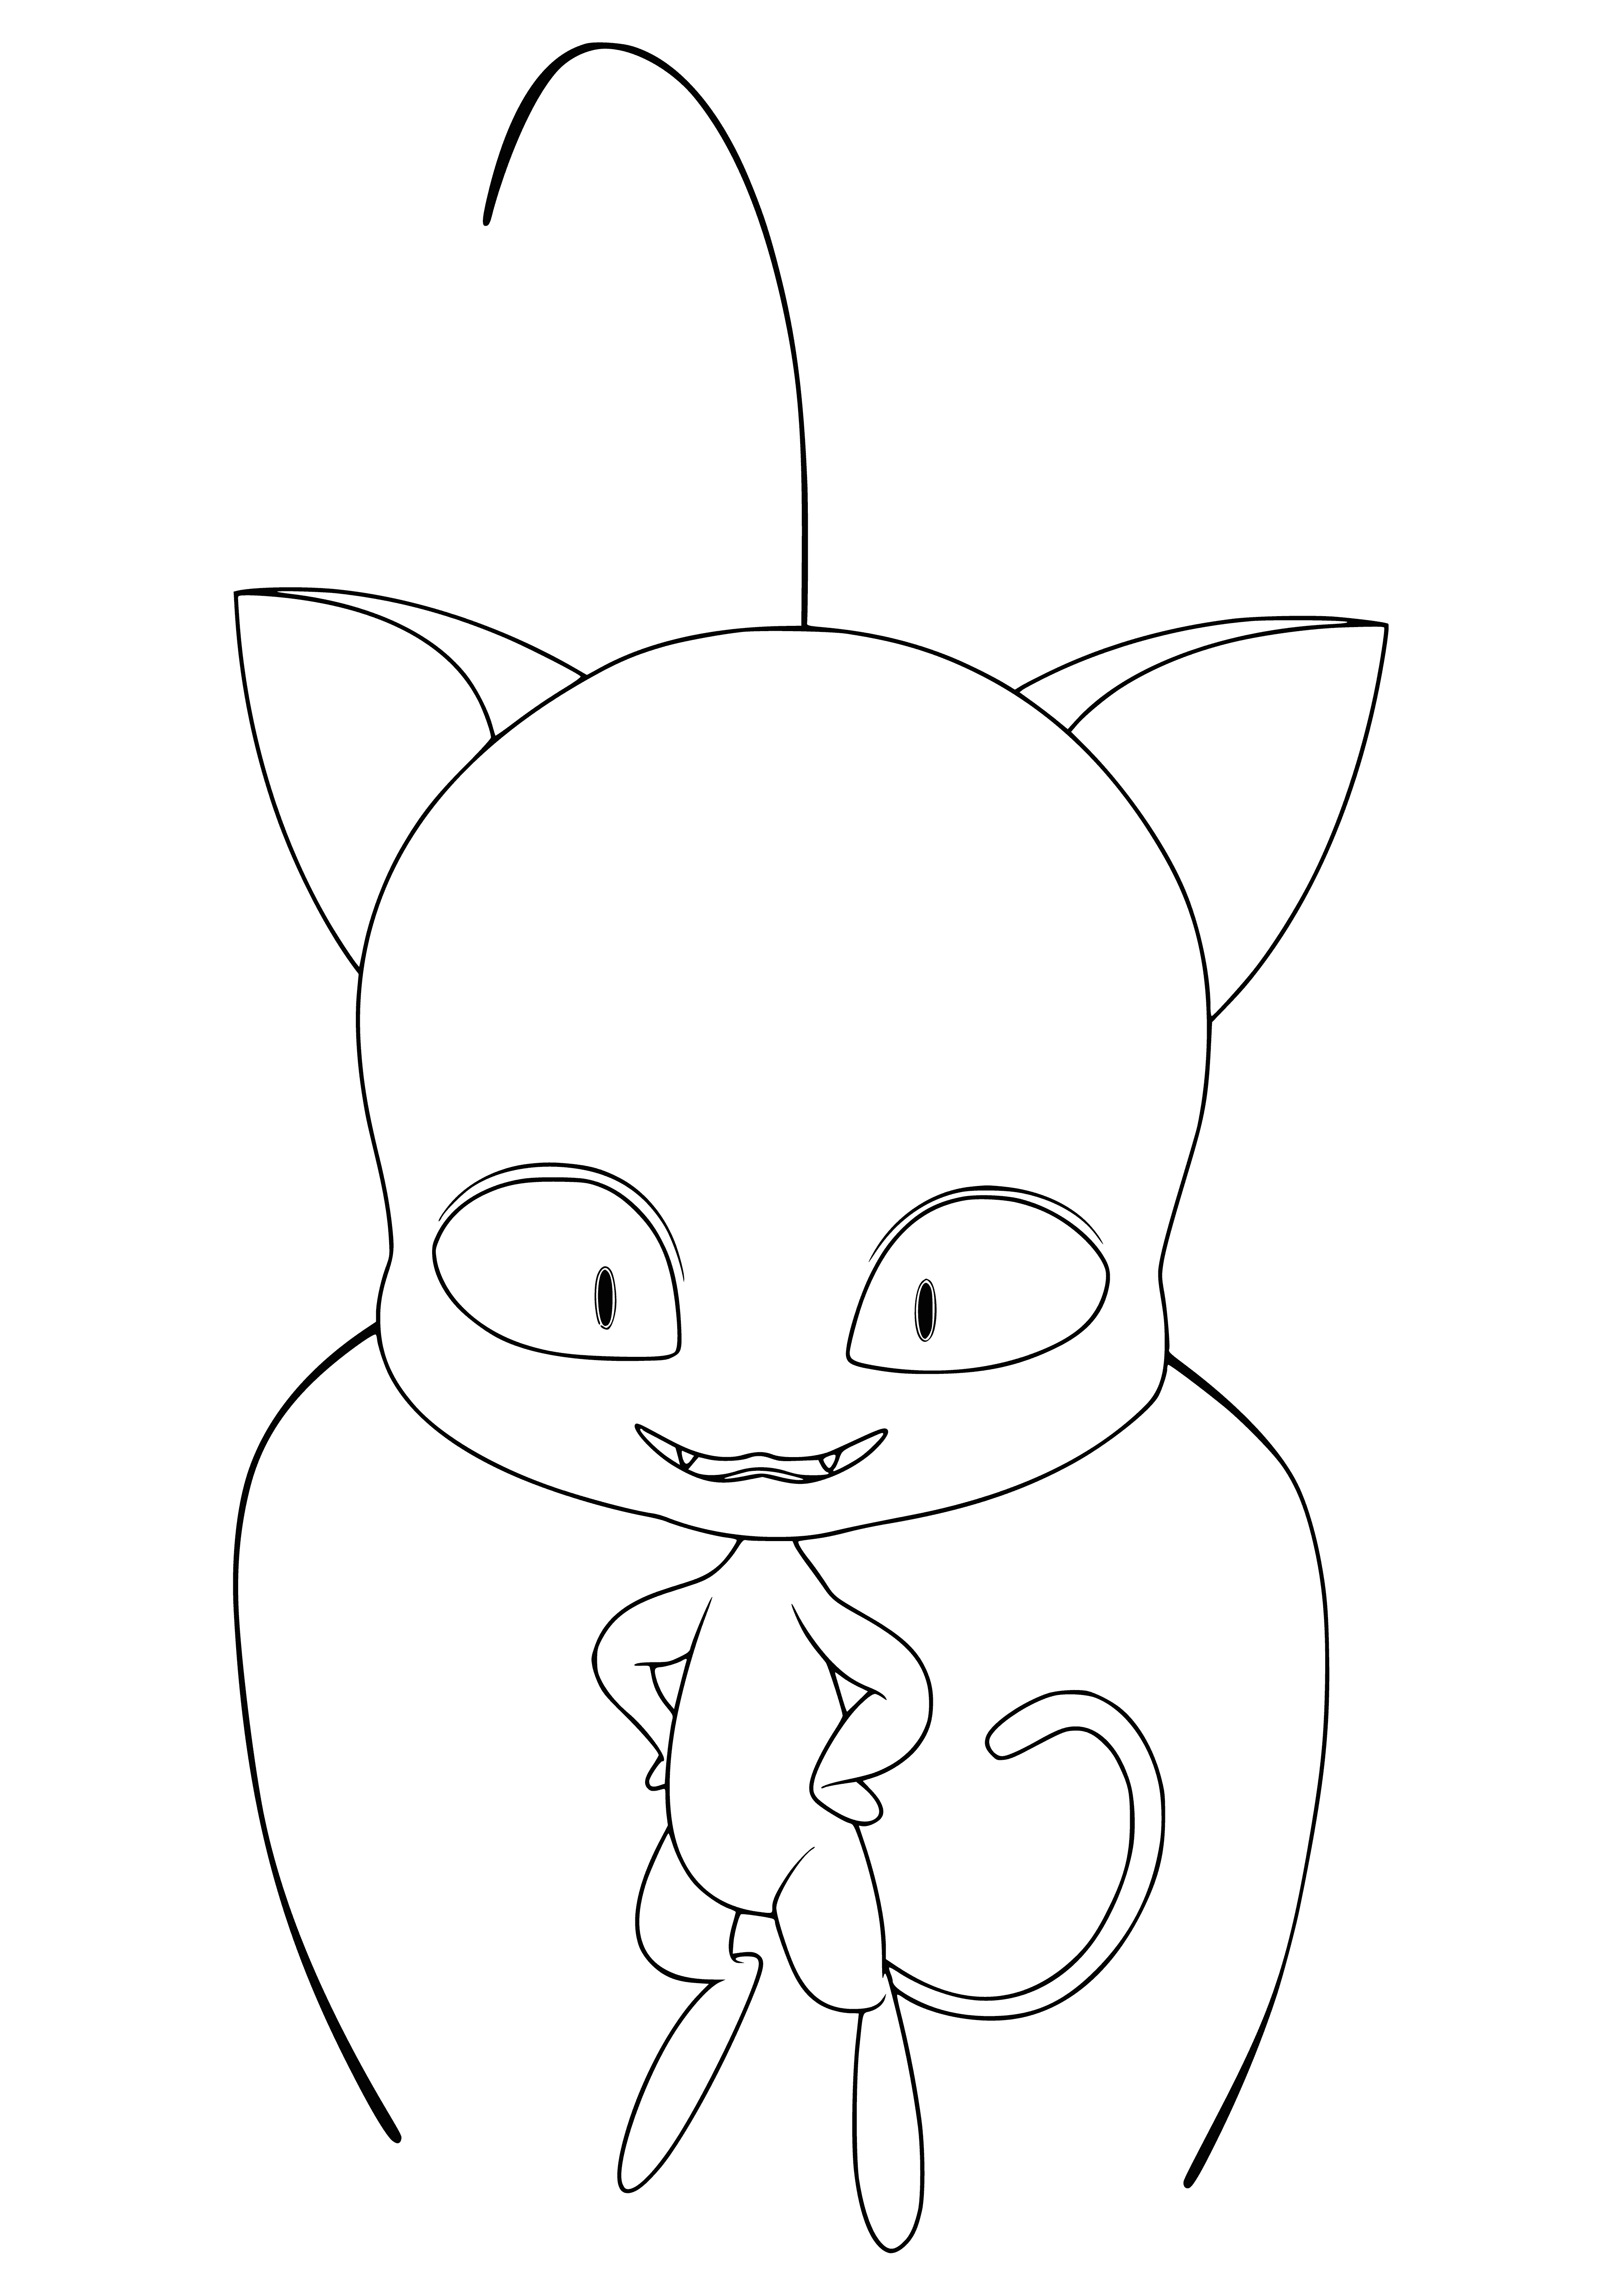 coloring page: Small dark-furred creature with two antennae and open mouth, sitting on round, light-colored object. Smiling with big black eyes.